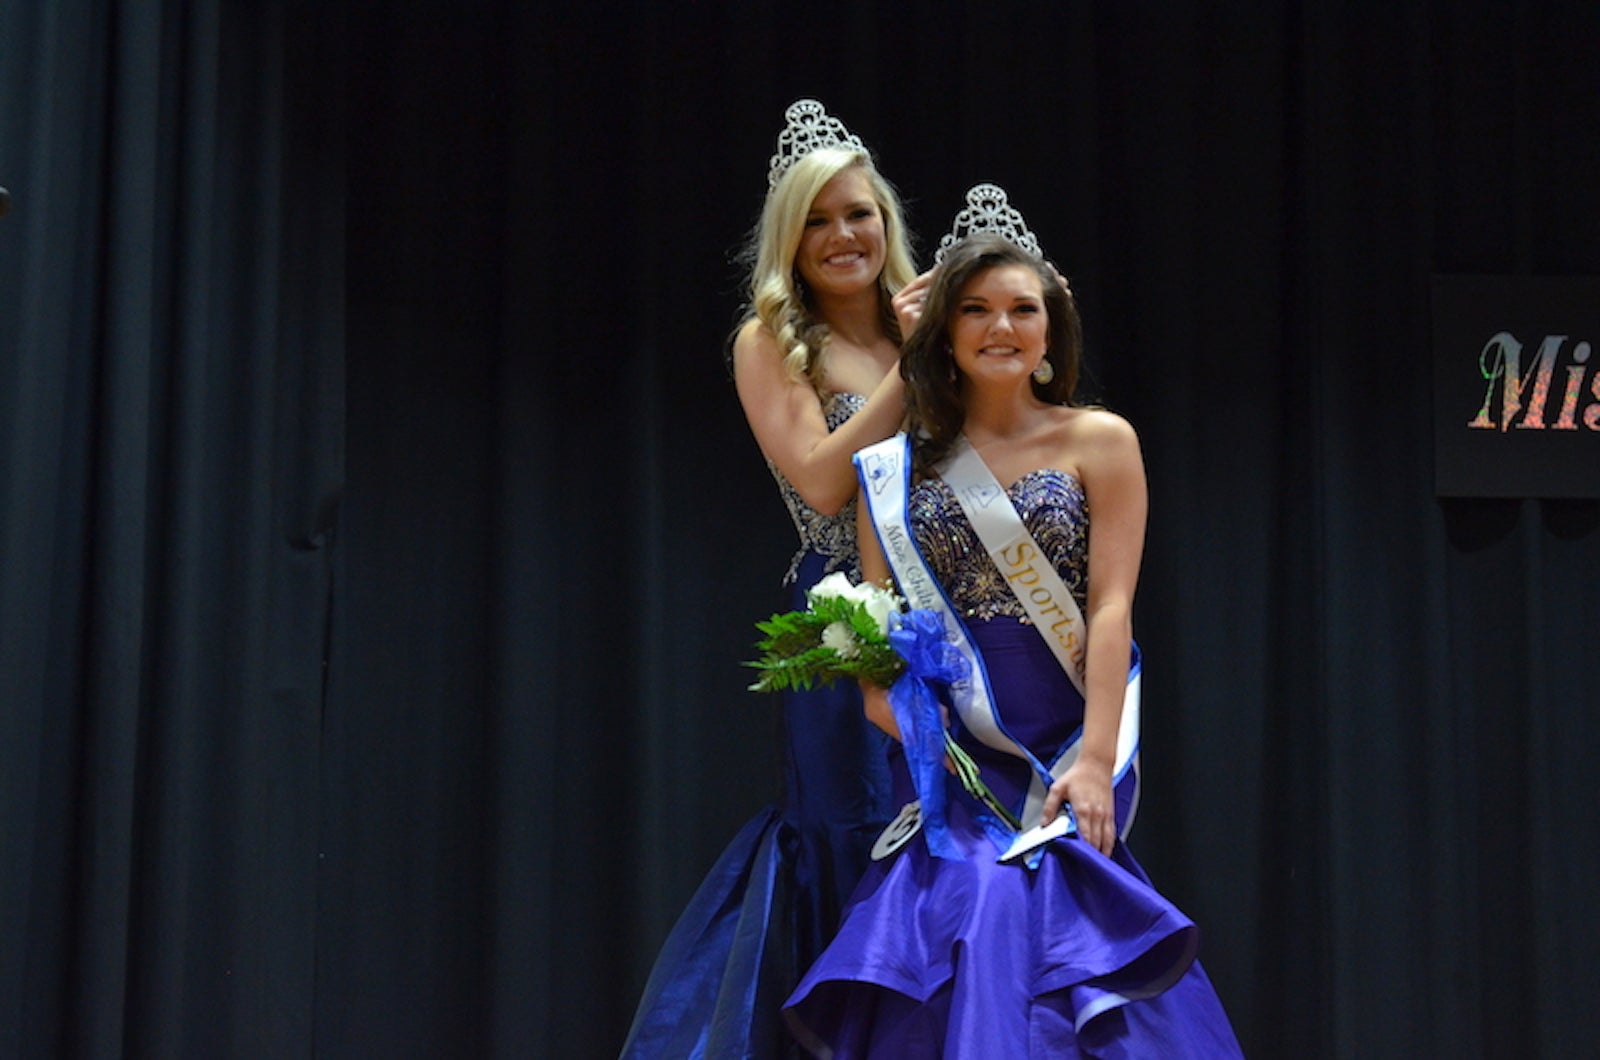 Crowned Queen: McWhorter enjoys reign as Miss Chilton county